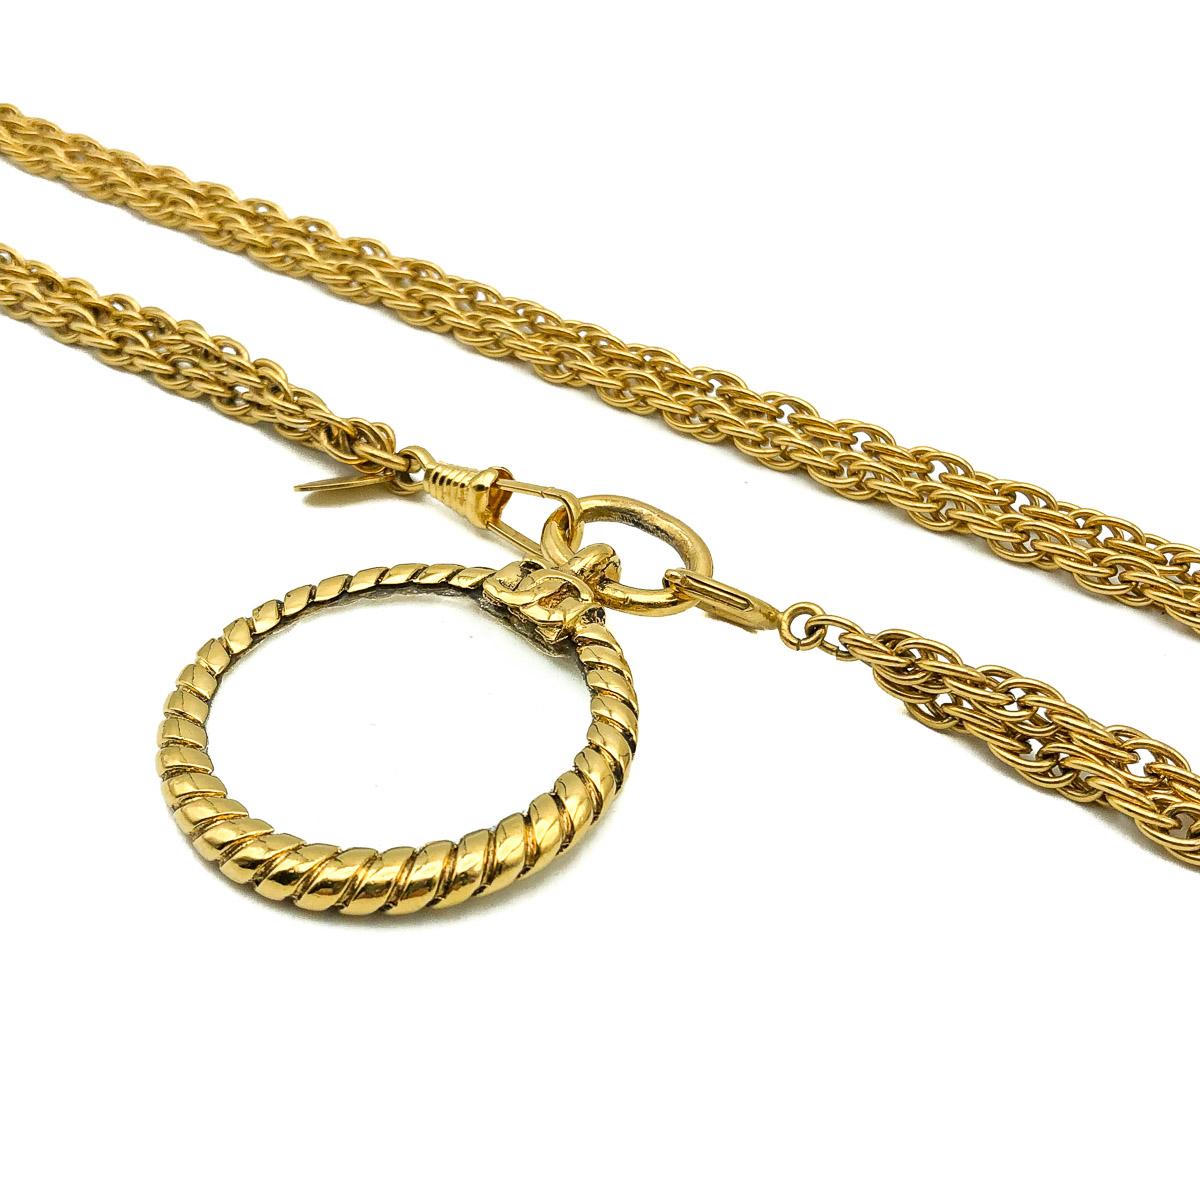 A superb Vintage Chanel Looking Glass Necklace. Crafted in weighty gold plated metal and set with a magnifying glass finished to perfection with the iconic logo of the House of Chanel, the interlocking Cs.  In very good vintage condition. Signed.